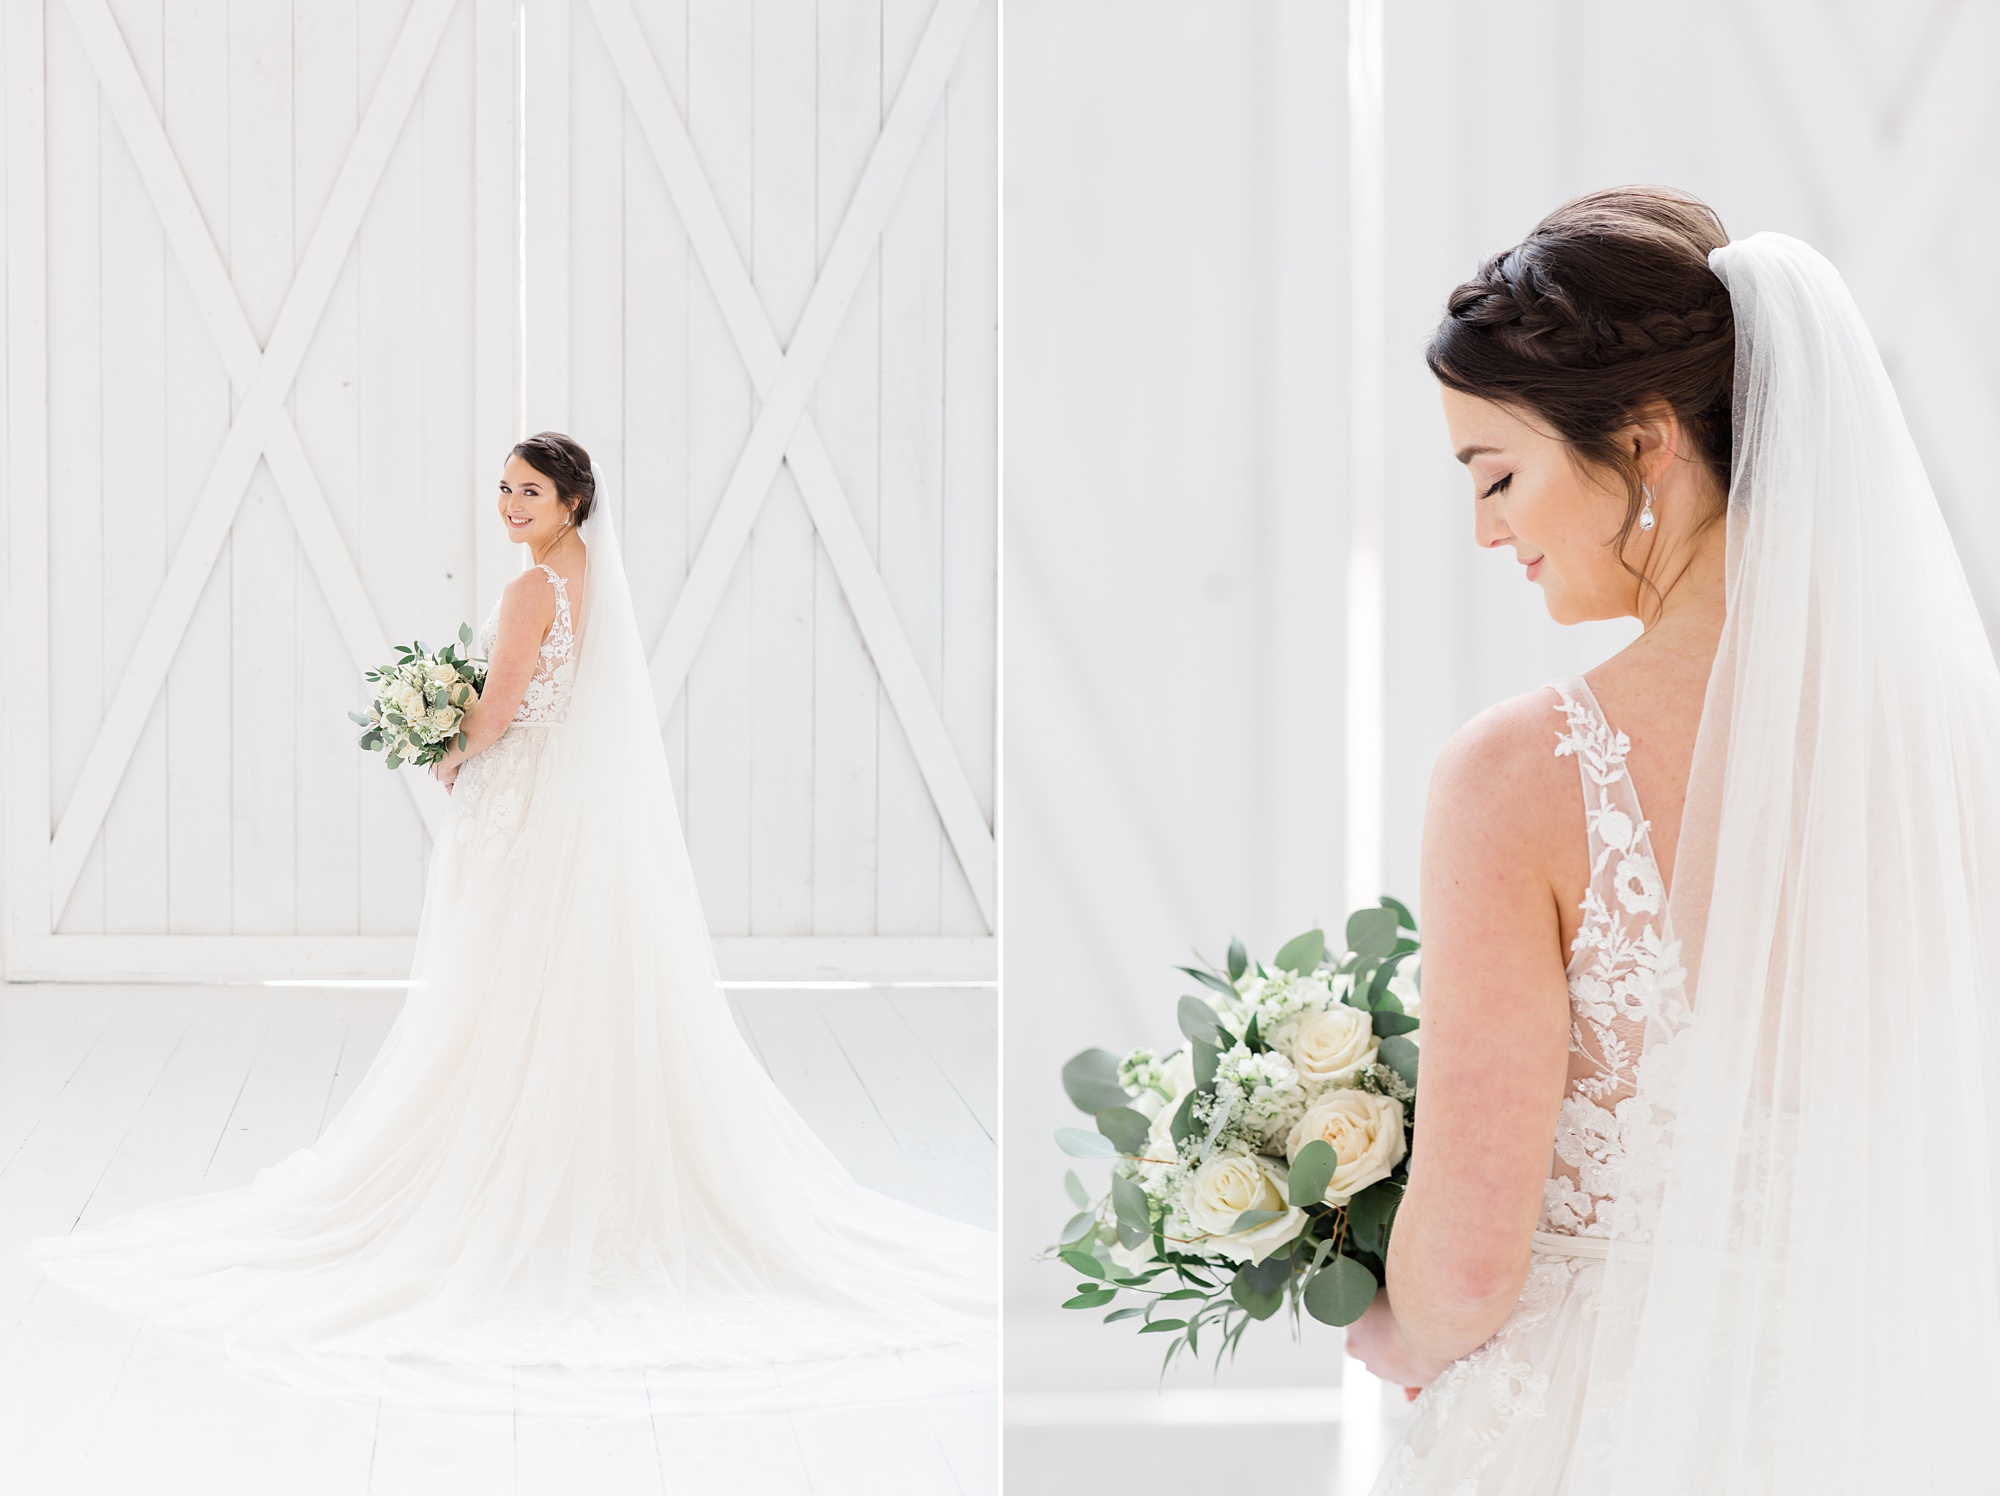 Southern bridal portraits at the White Sparrow